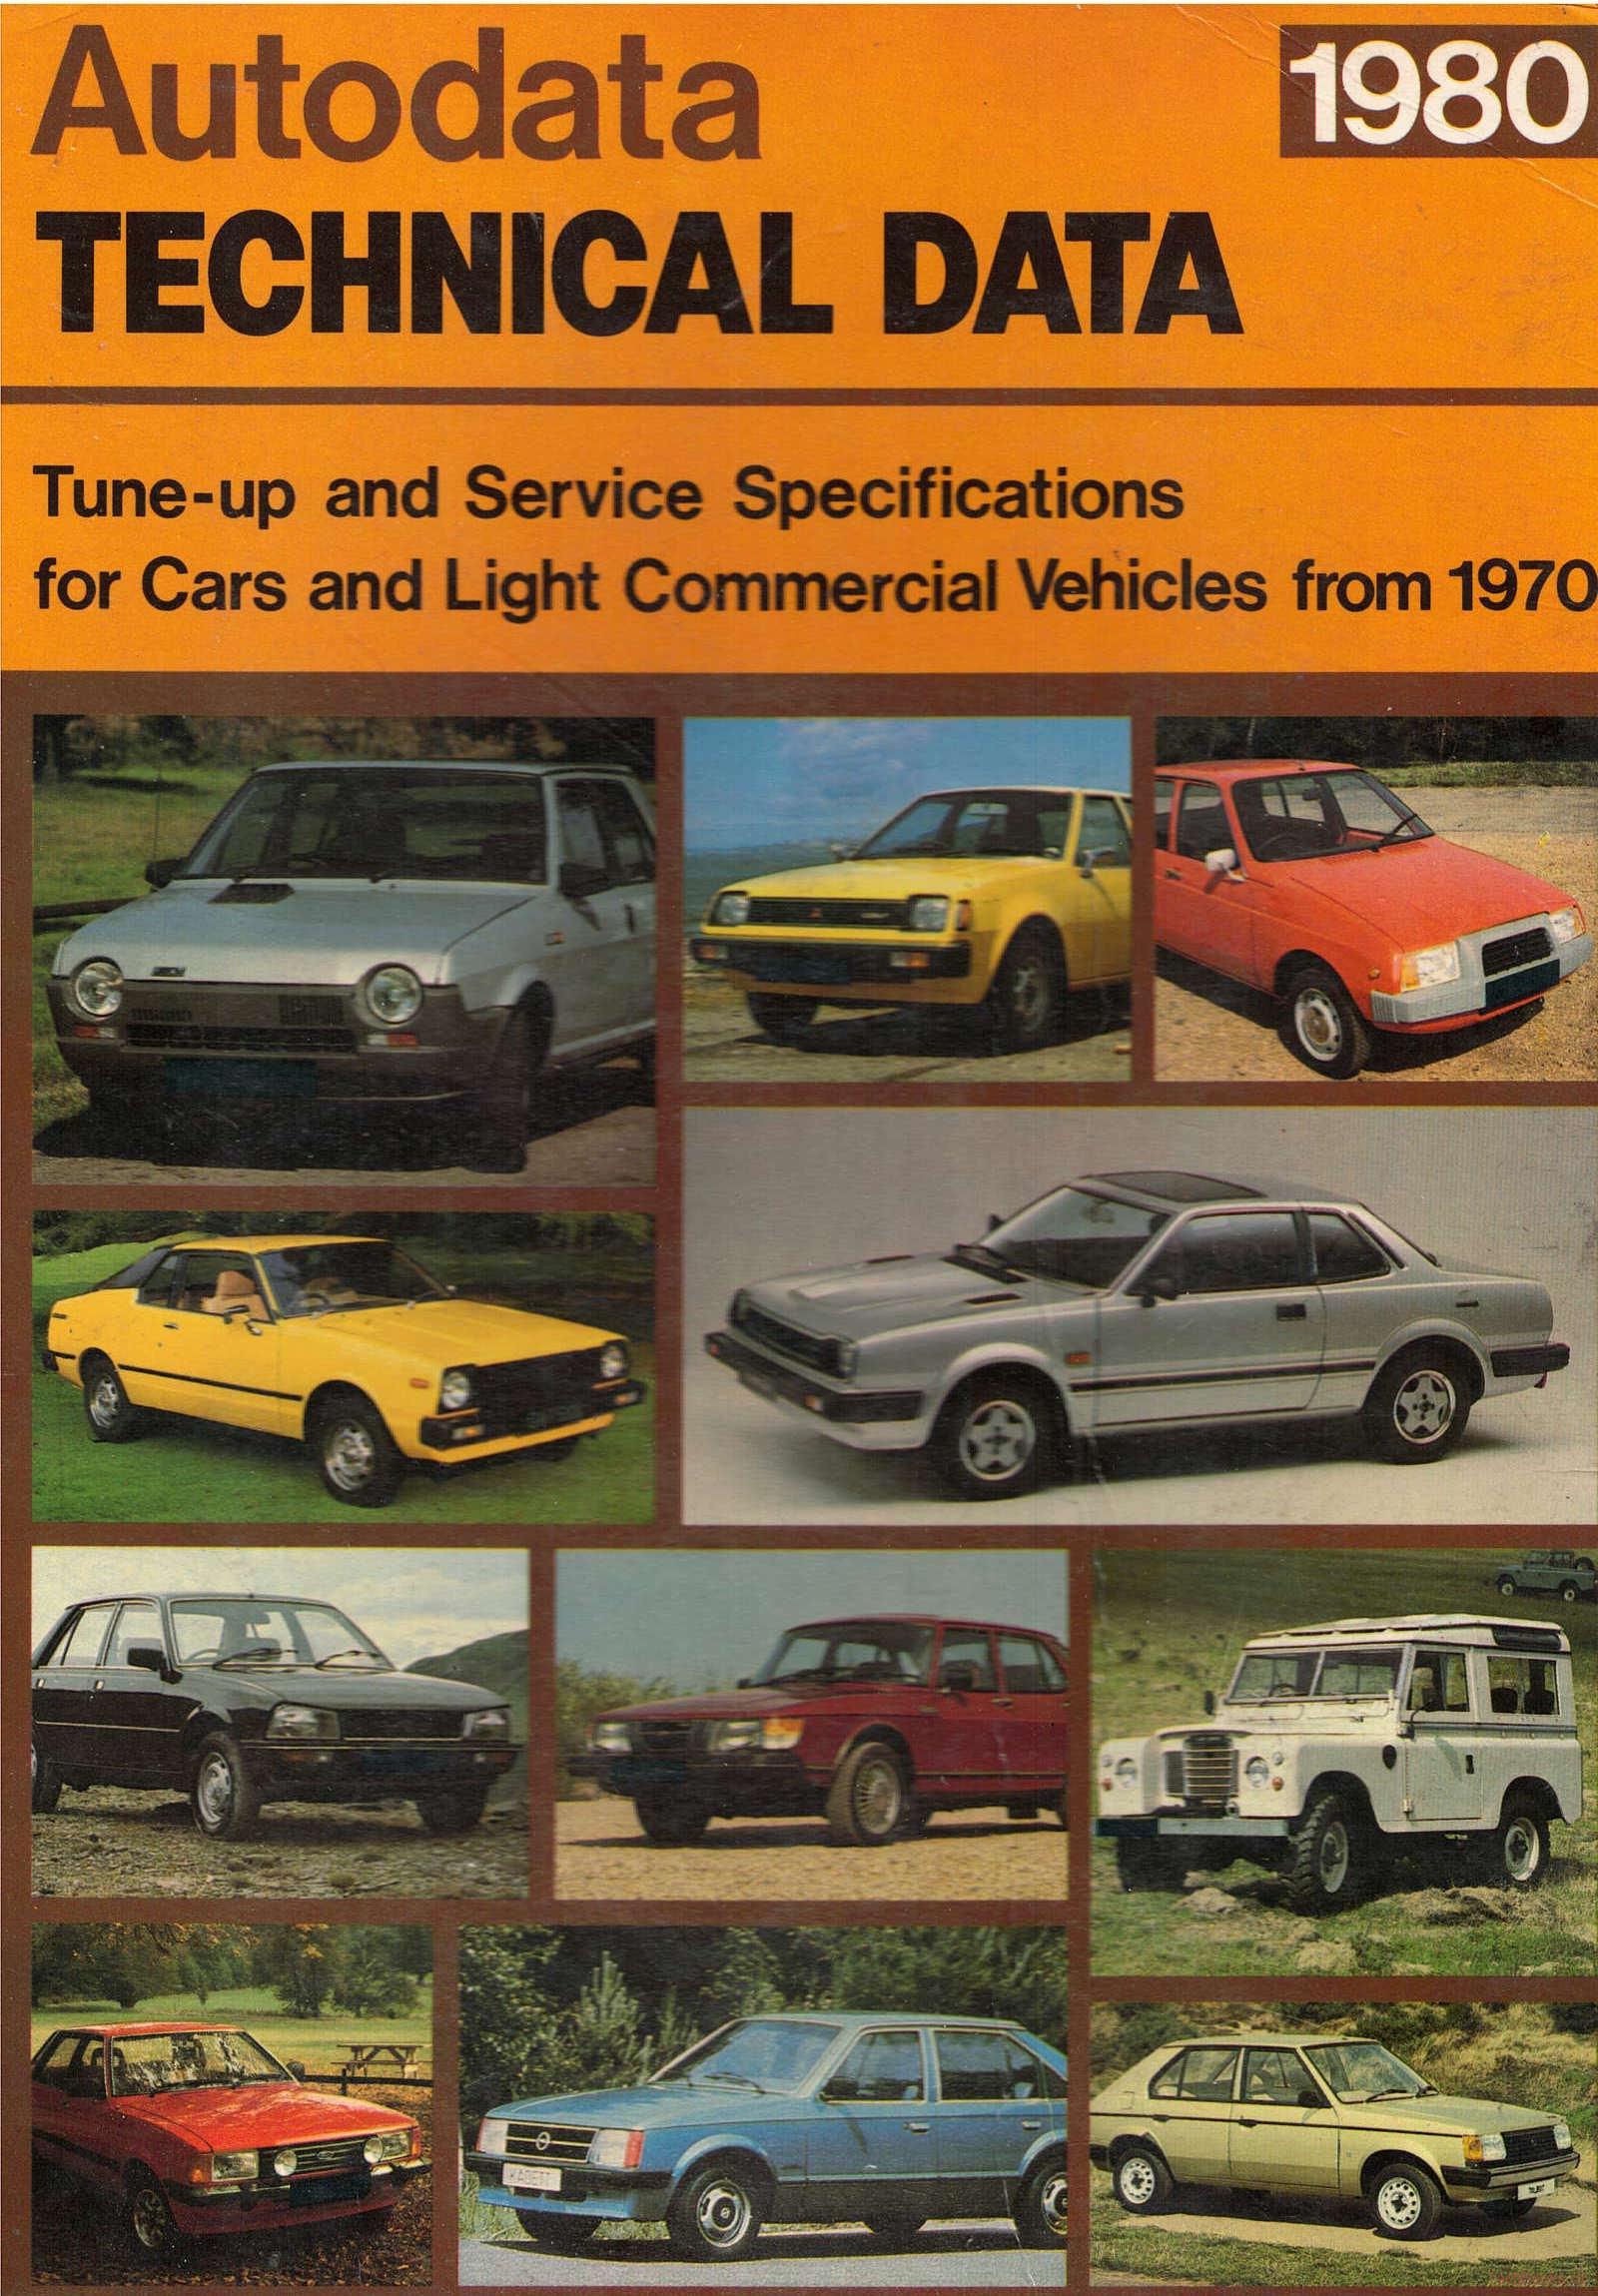 Autodata - Technical data (Cars from 1970 to 1980)